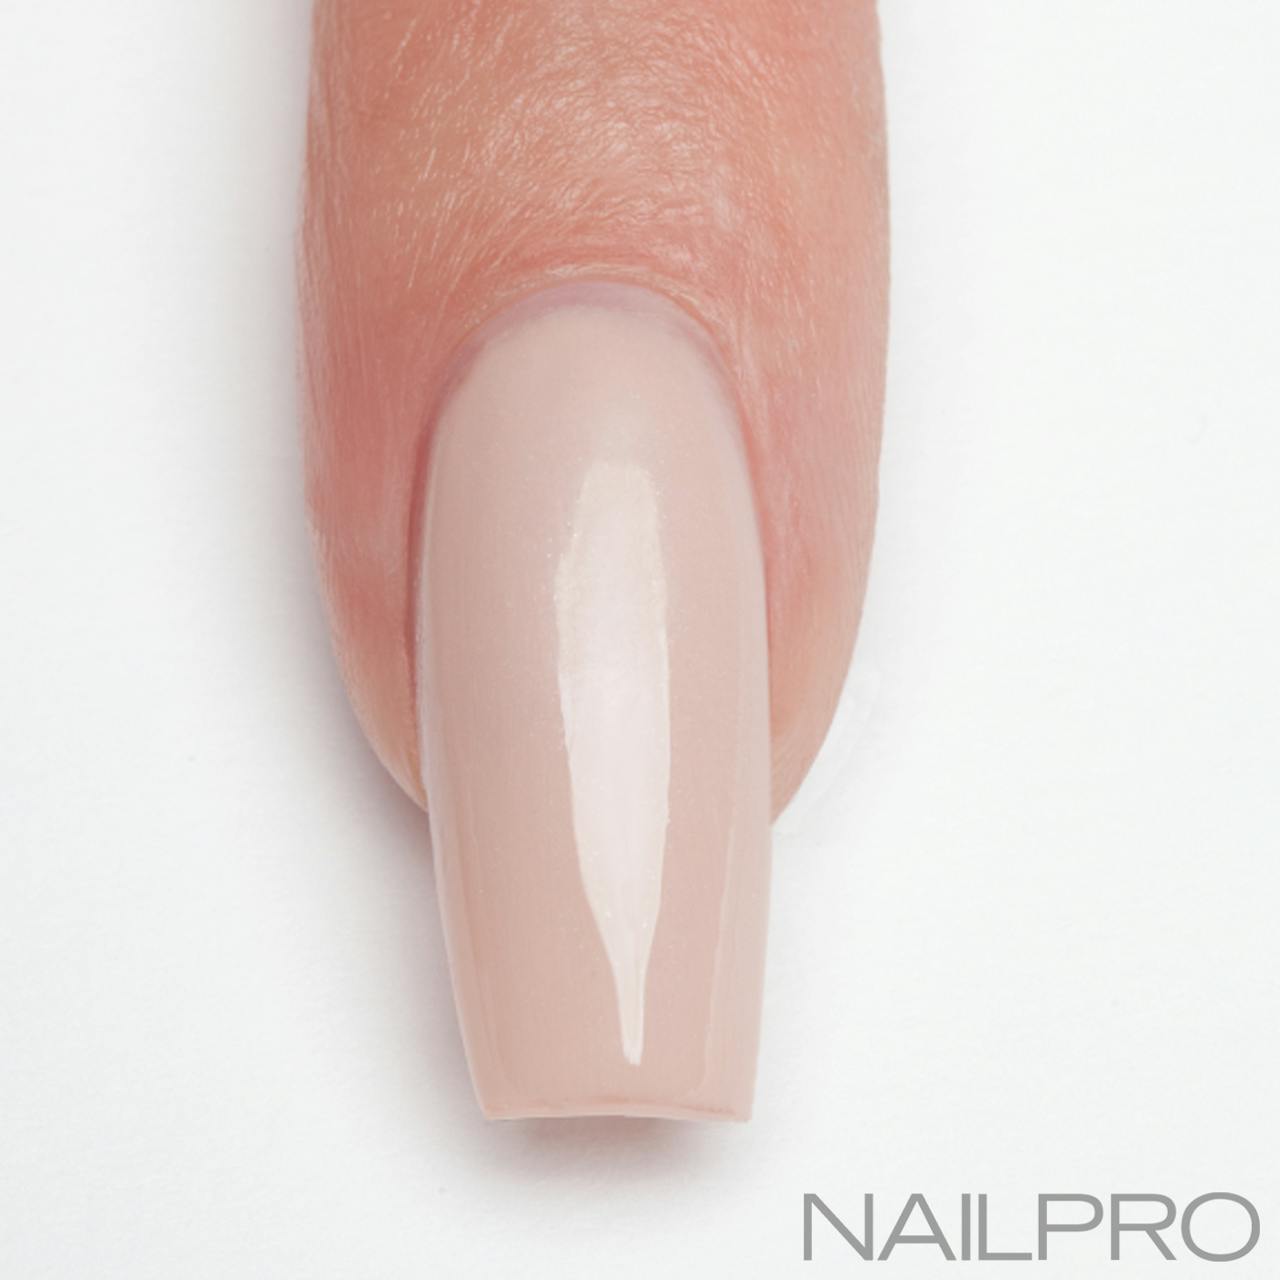 Expert Advice How To The Most-Requested Shapes | Nailpro